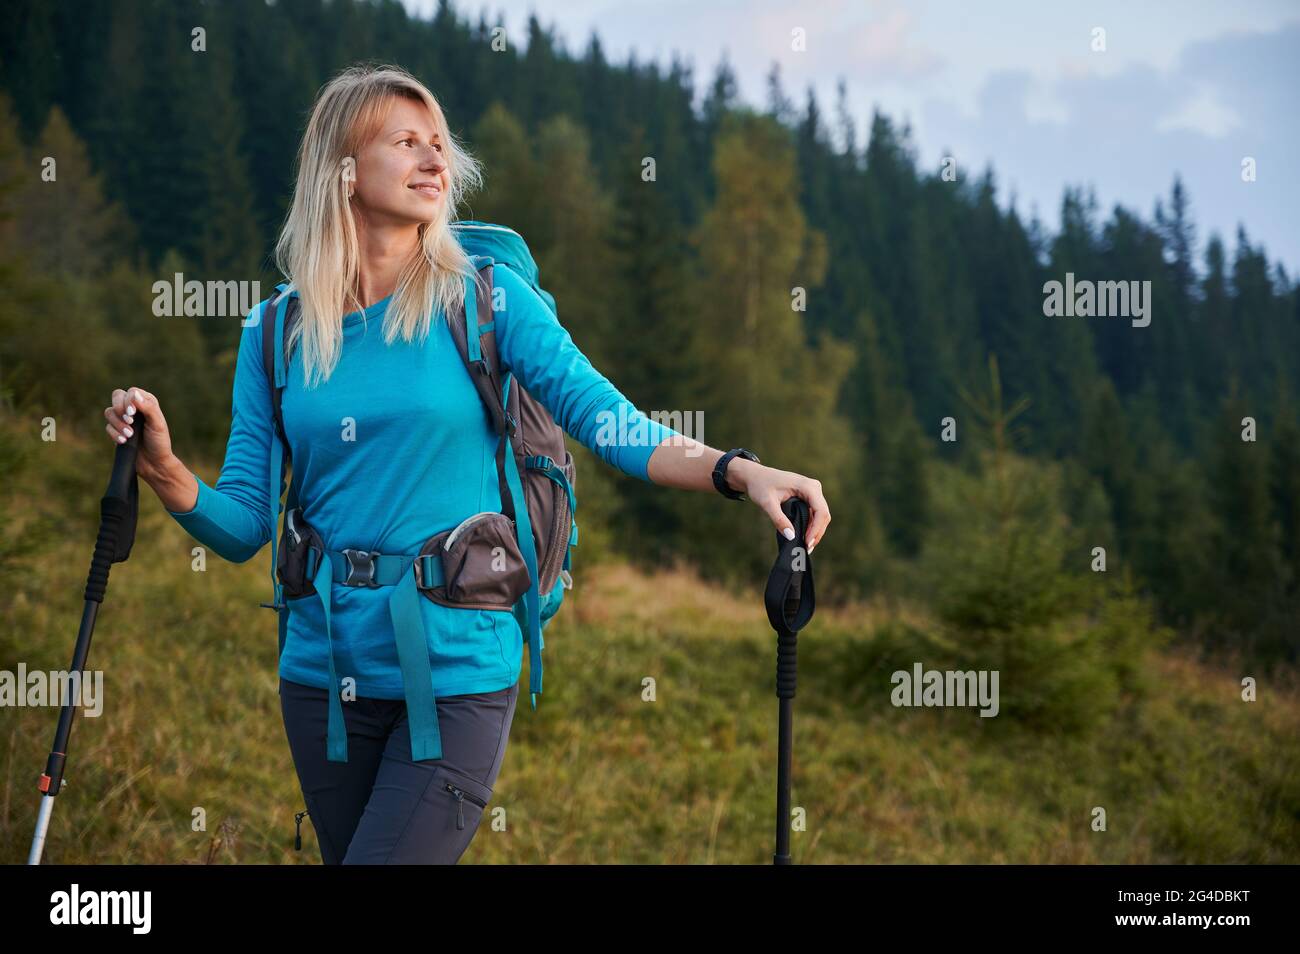 Joyful female traveler looking at beautiful mountains and smiling while holding trekking poles. Charming young woman hiker carrying backpack and holding hiking sticks while standing on grassy hill. Stock Photo